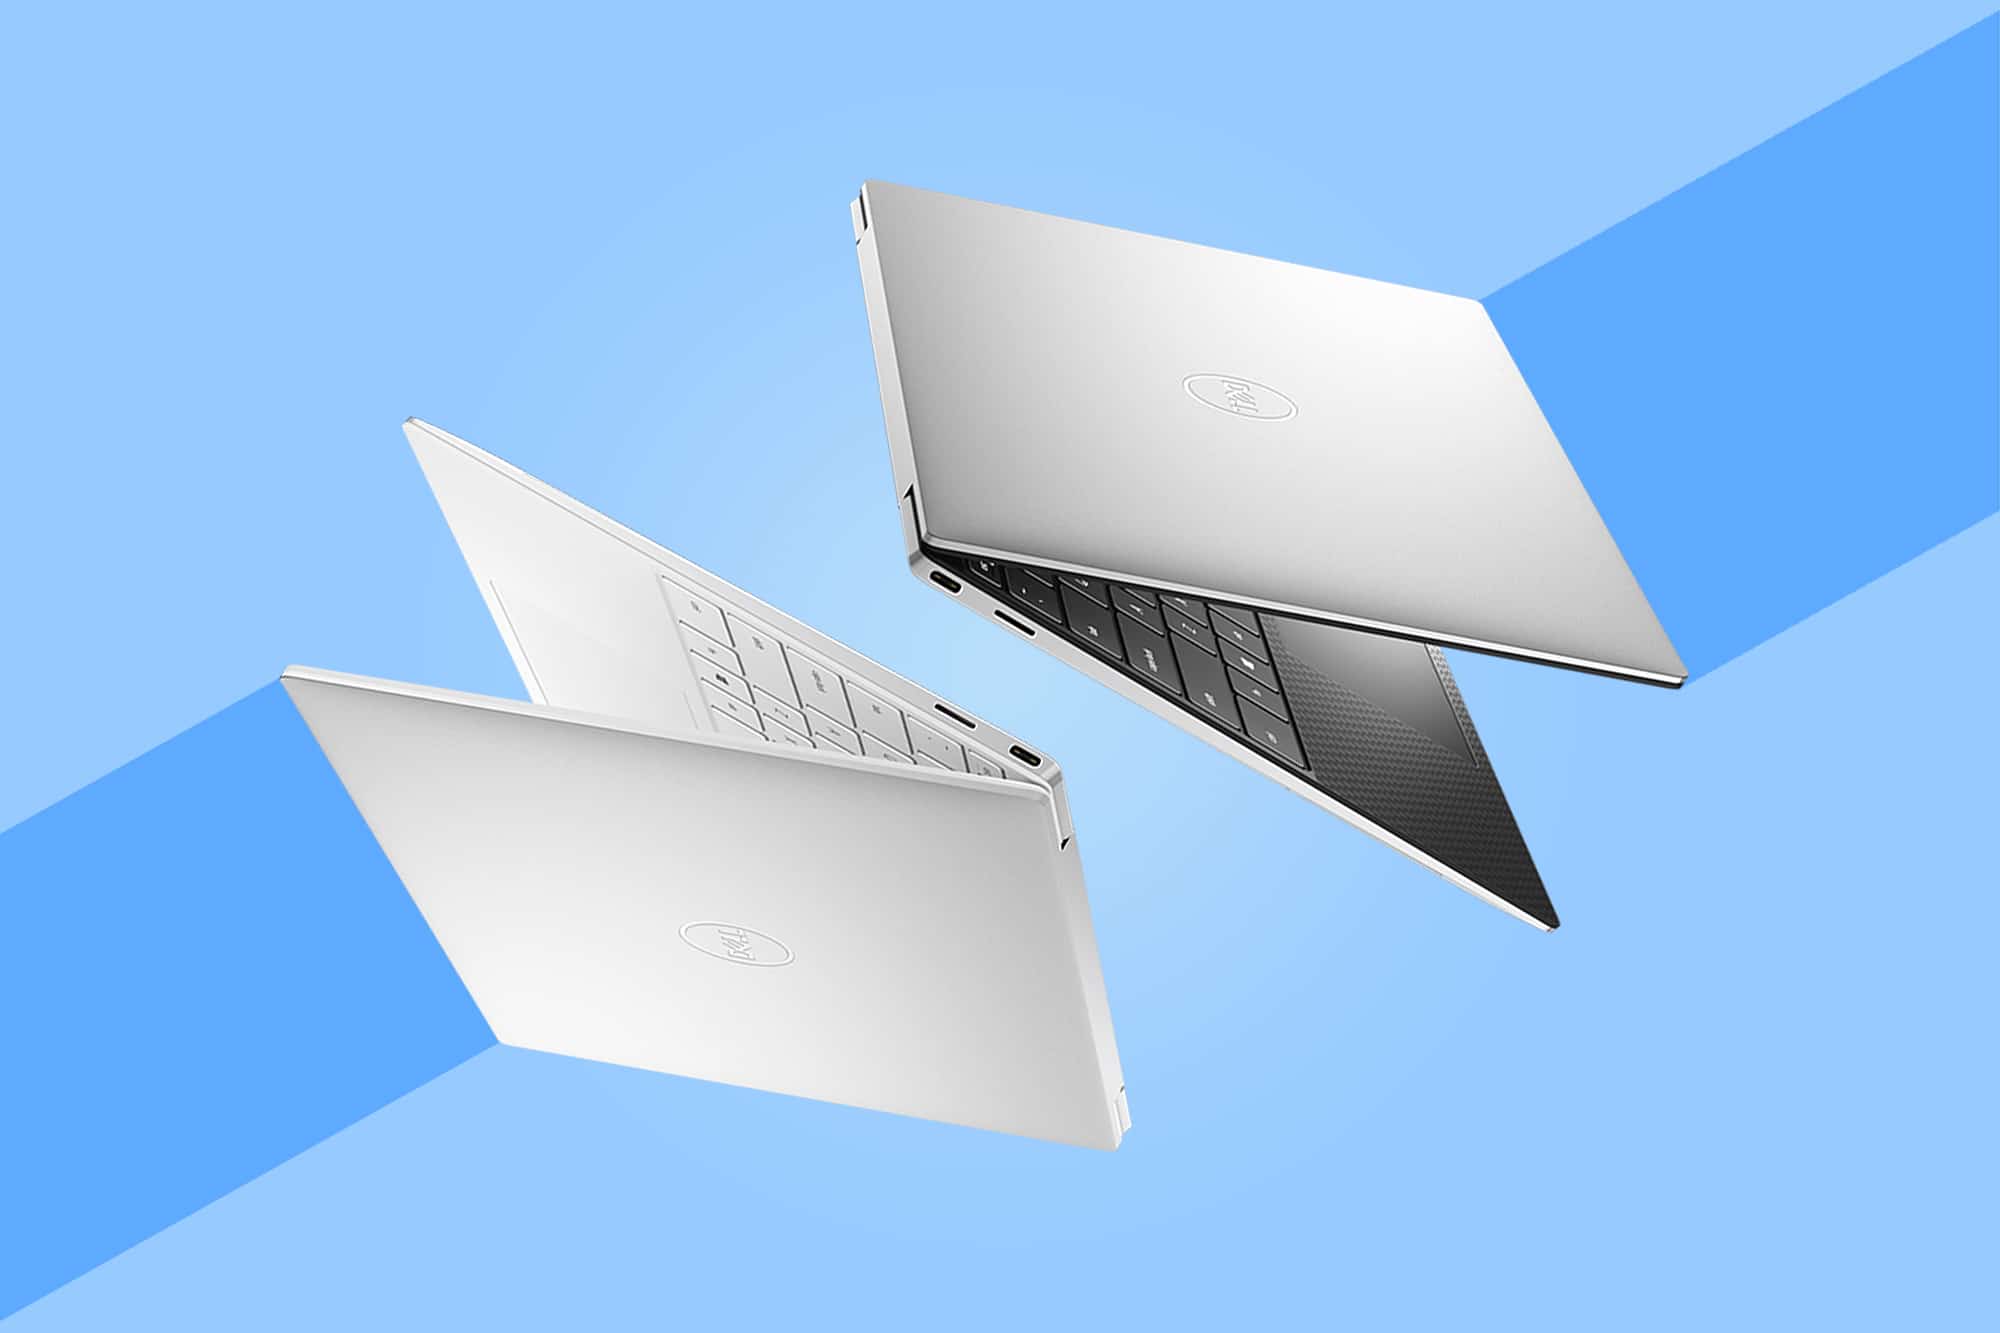 This is the cover photo for our Best Touchscreen Laptops article. It features two Dell XPS laptops hovering in the air, with a blue background.